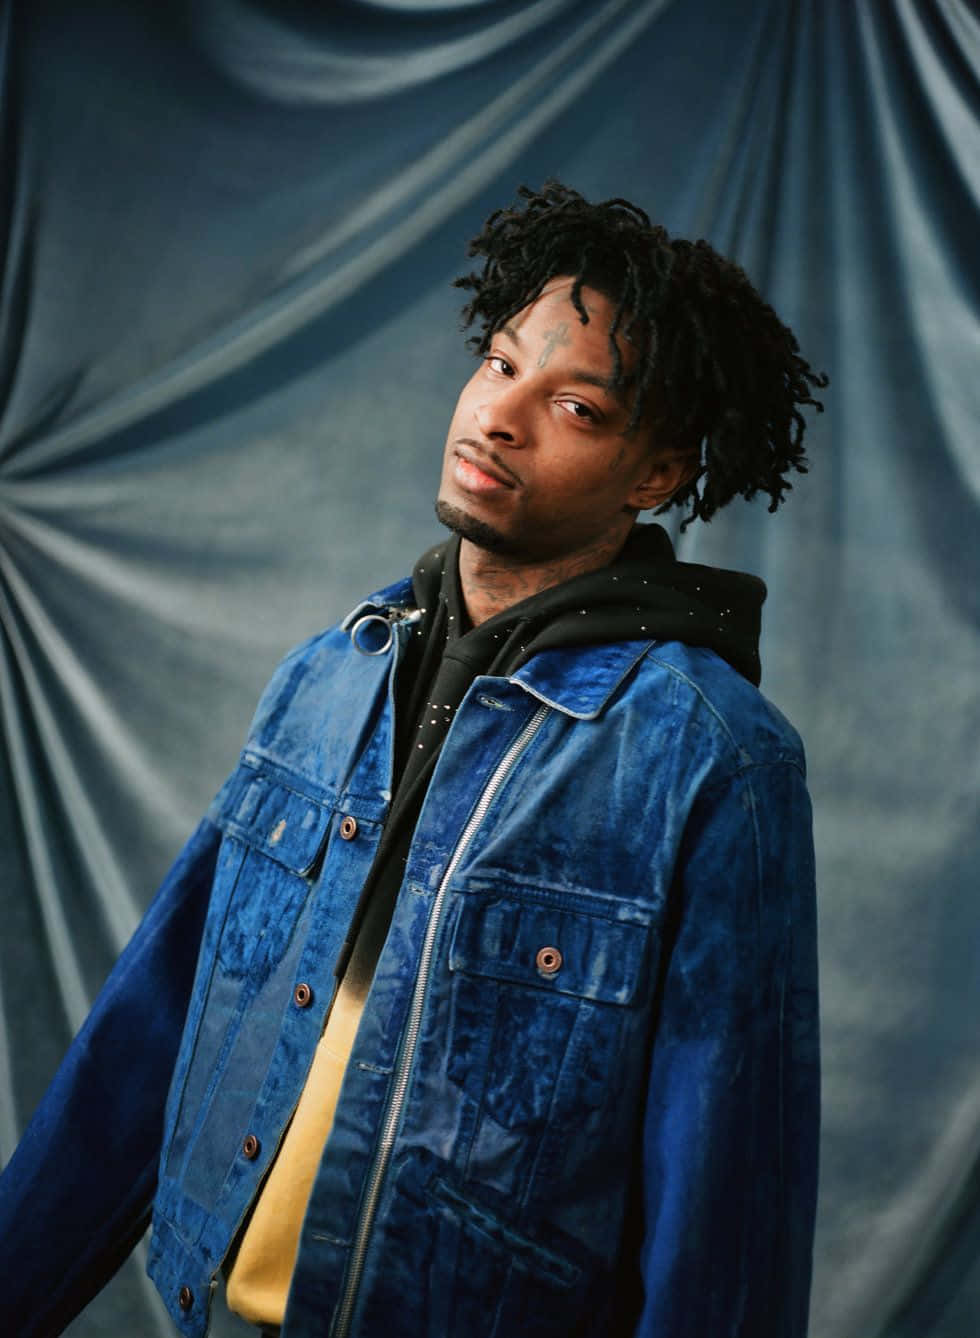 21savage In Concerto.